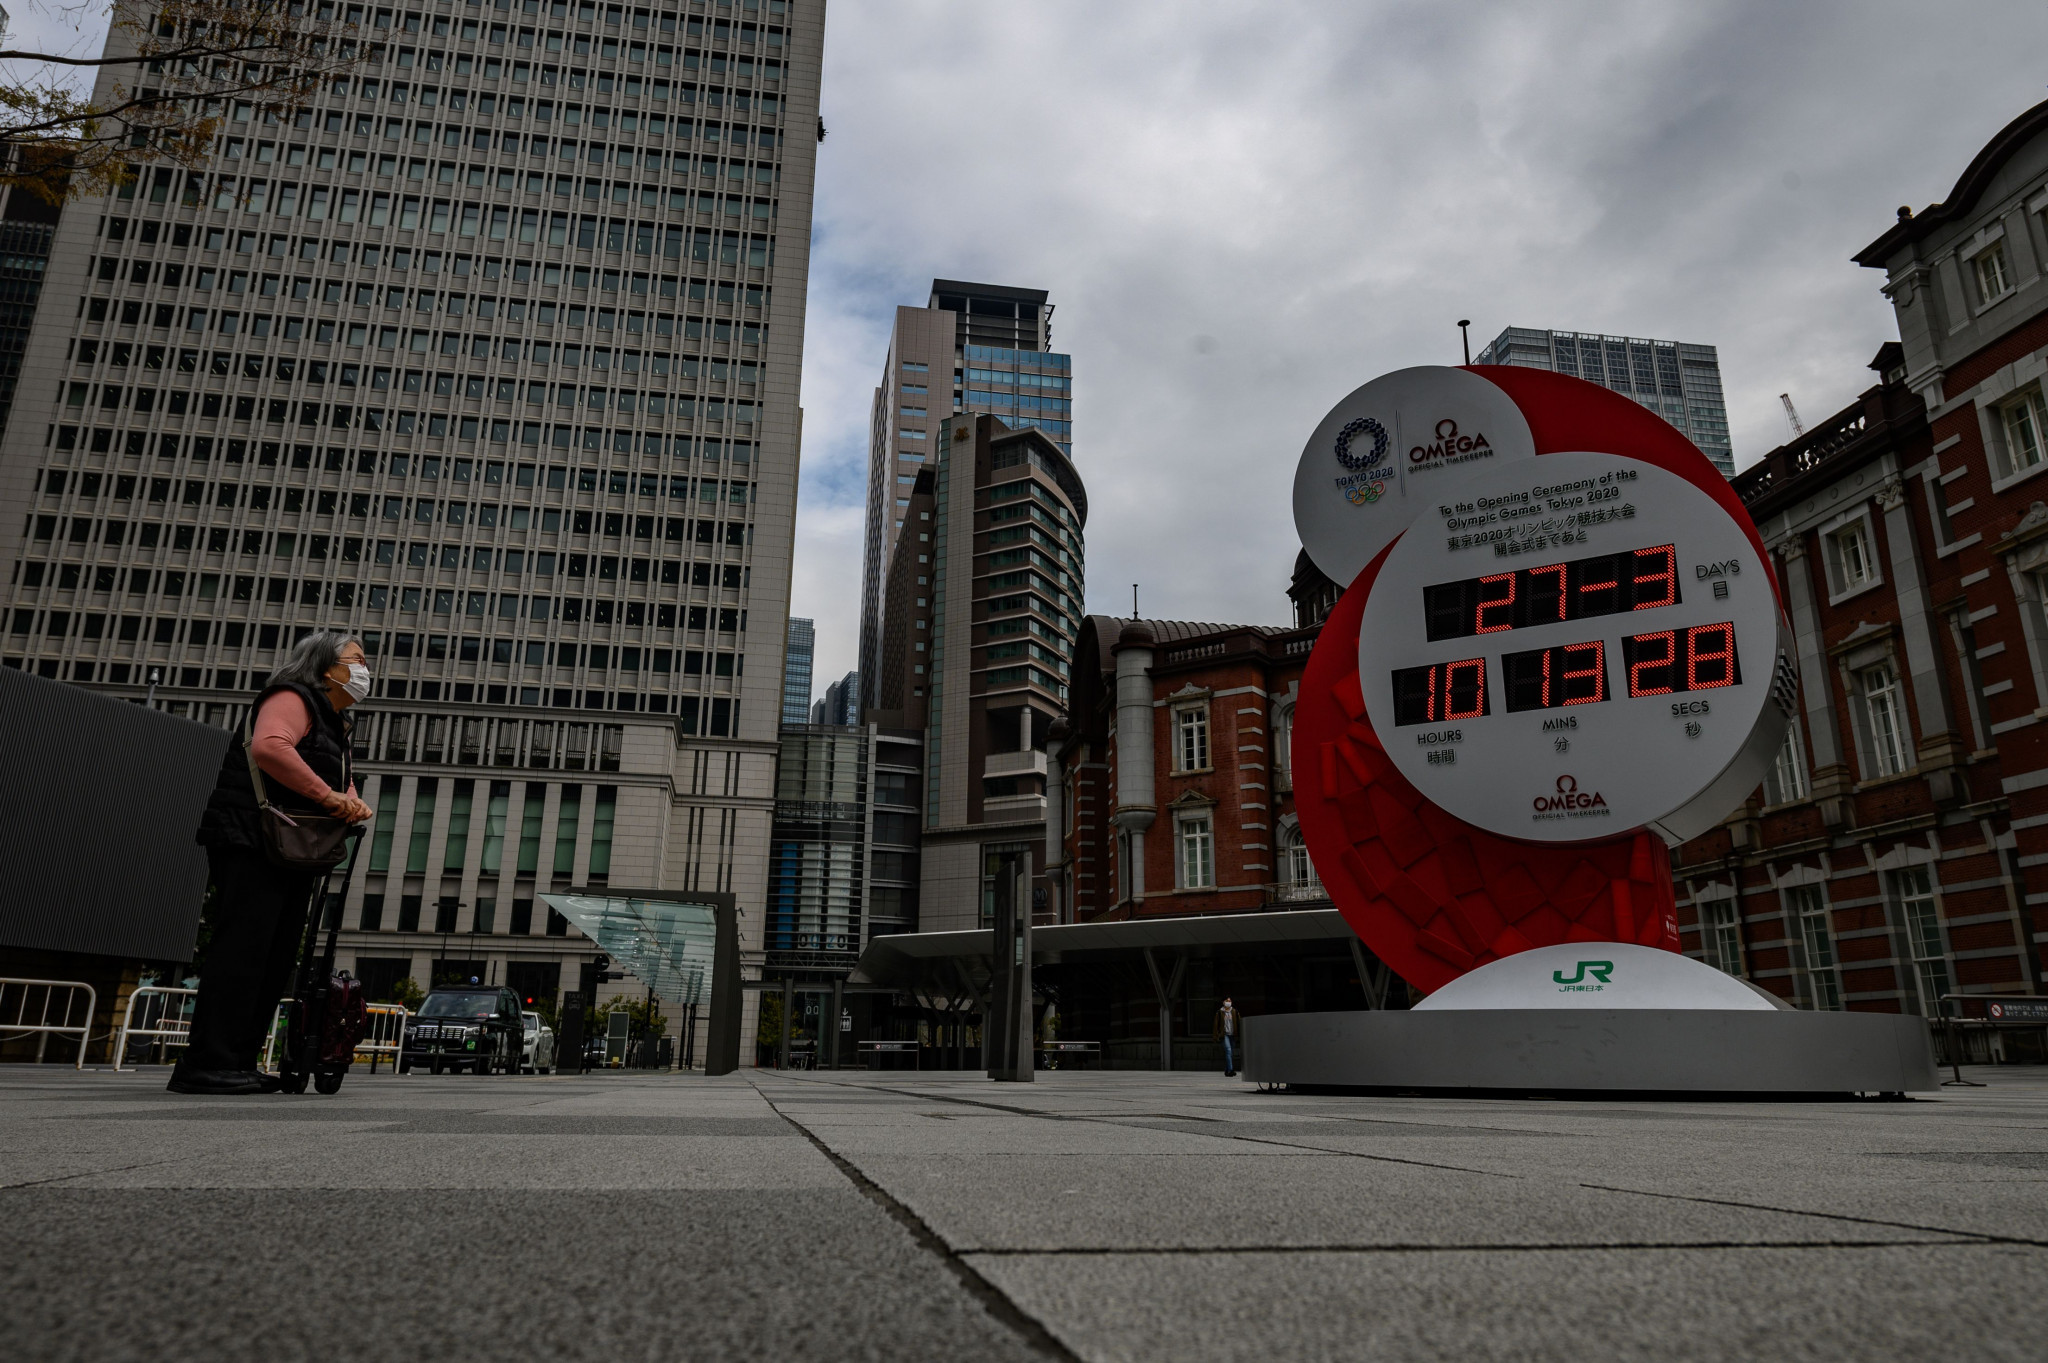 The countdown is continuing to the rescheduled Tokyo 2020 Olympic Games, now due to take place from July 23 to August 8 2021 ©Getty Images